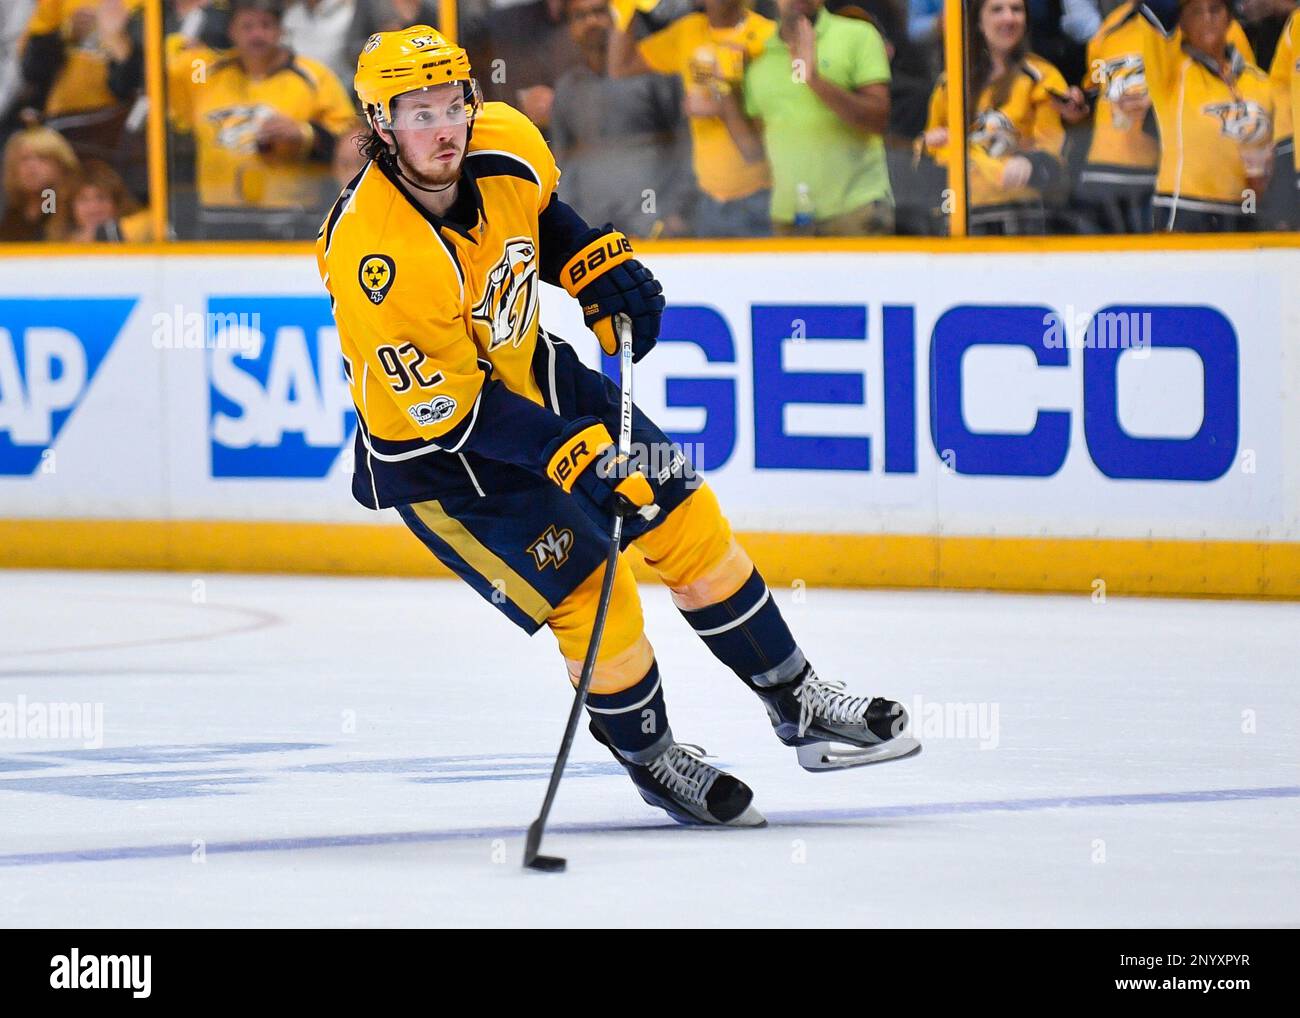 Nashville Predators center Ryan Johansen (92) handles the puck against the  Carolina Hurricanes during the first period in Game 1 of an NHL hockey  Stanley Cup first-round playoff series in Raleigh, N.C.